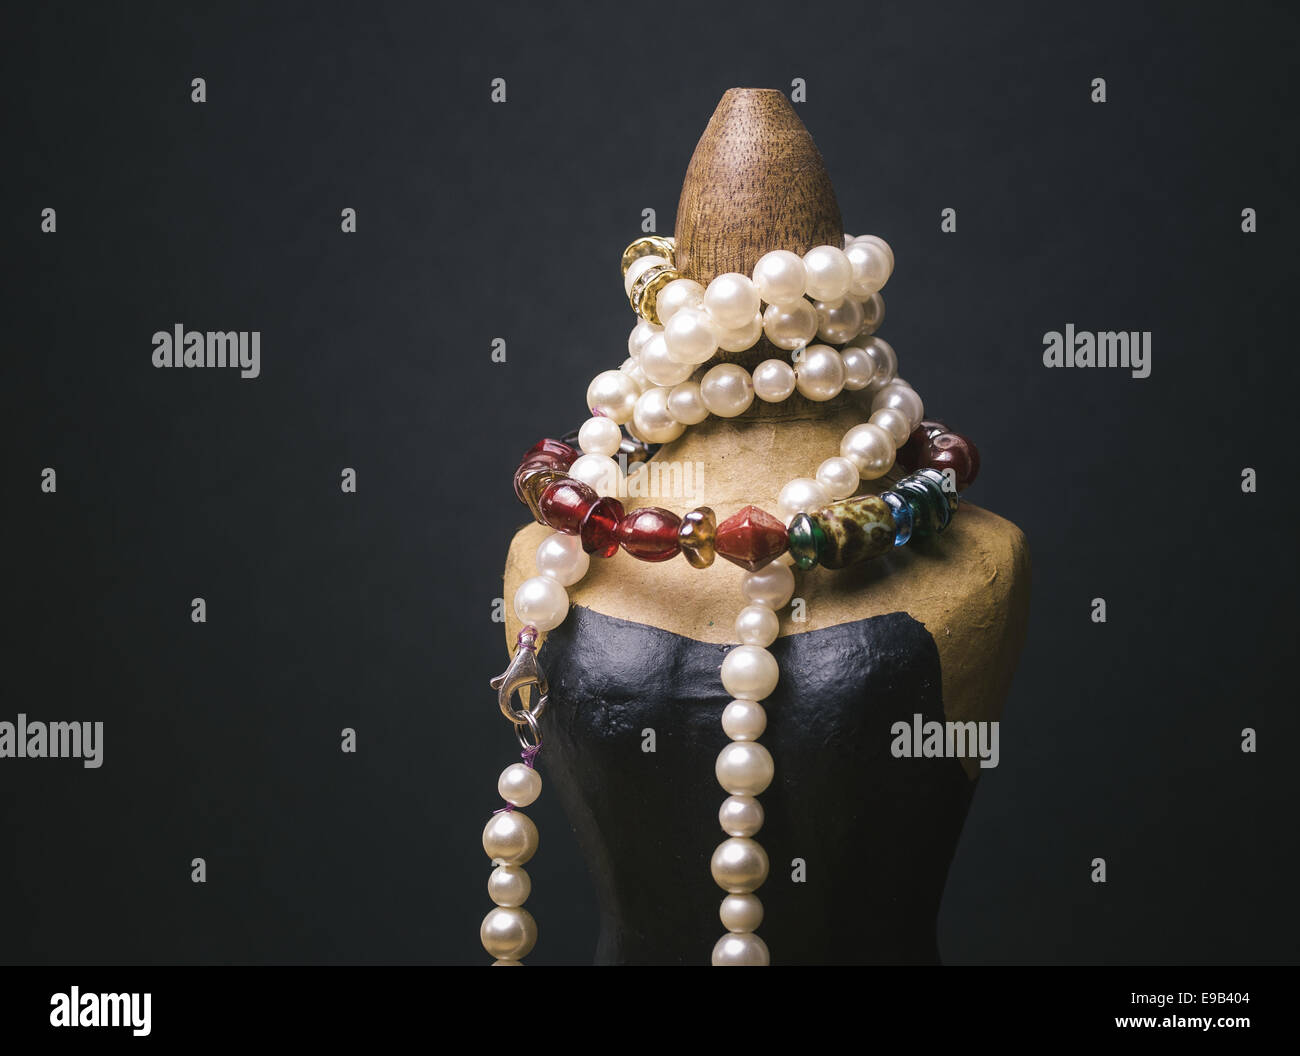 Miniature mannequin with necklaces isolated on dark background Stock Photo